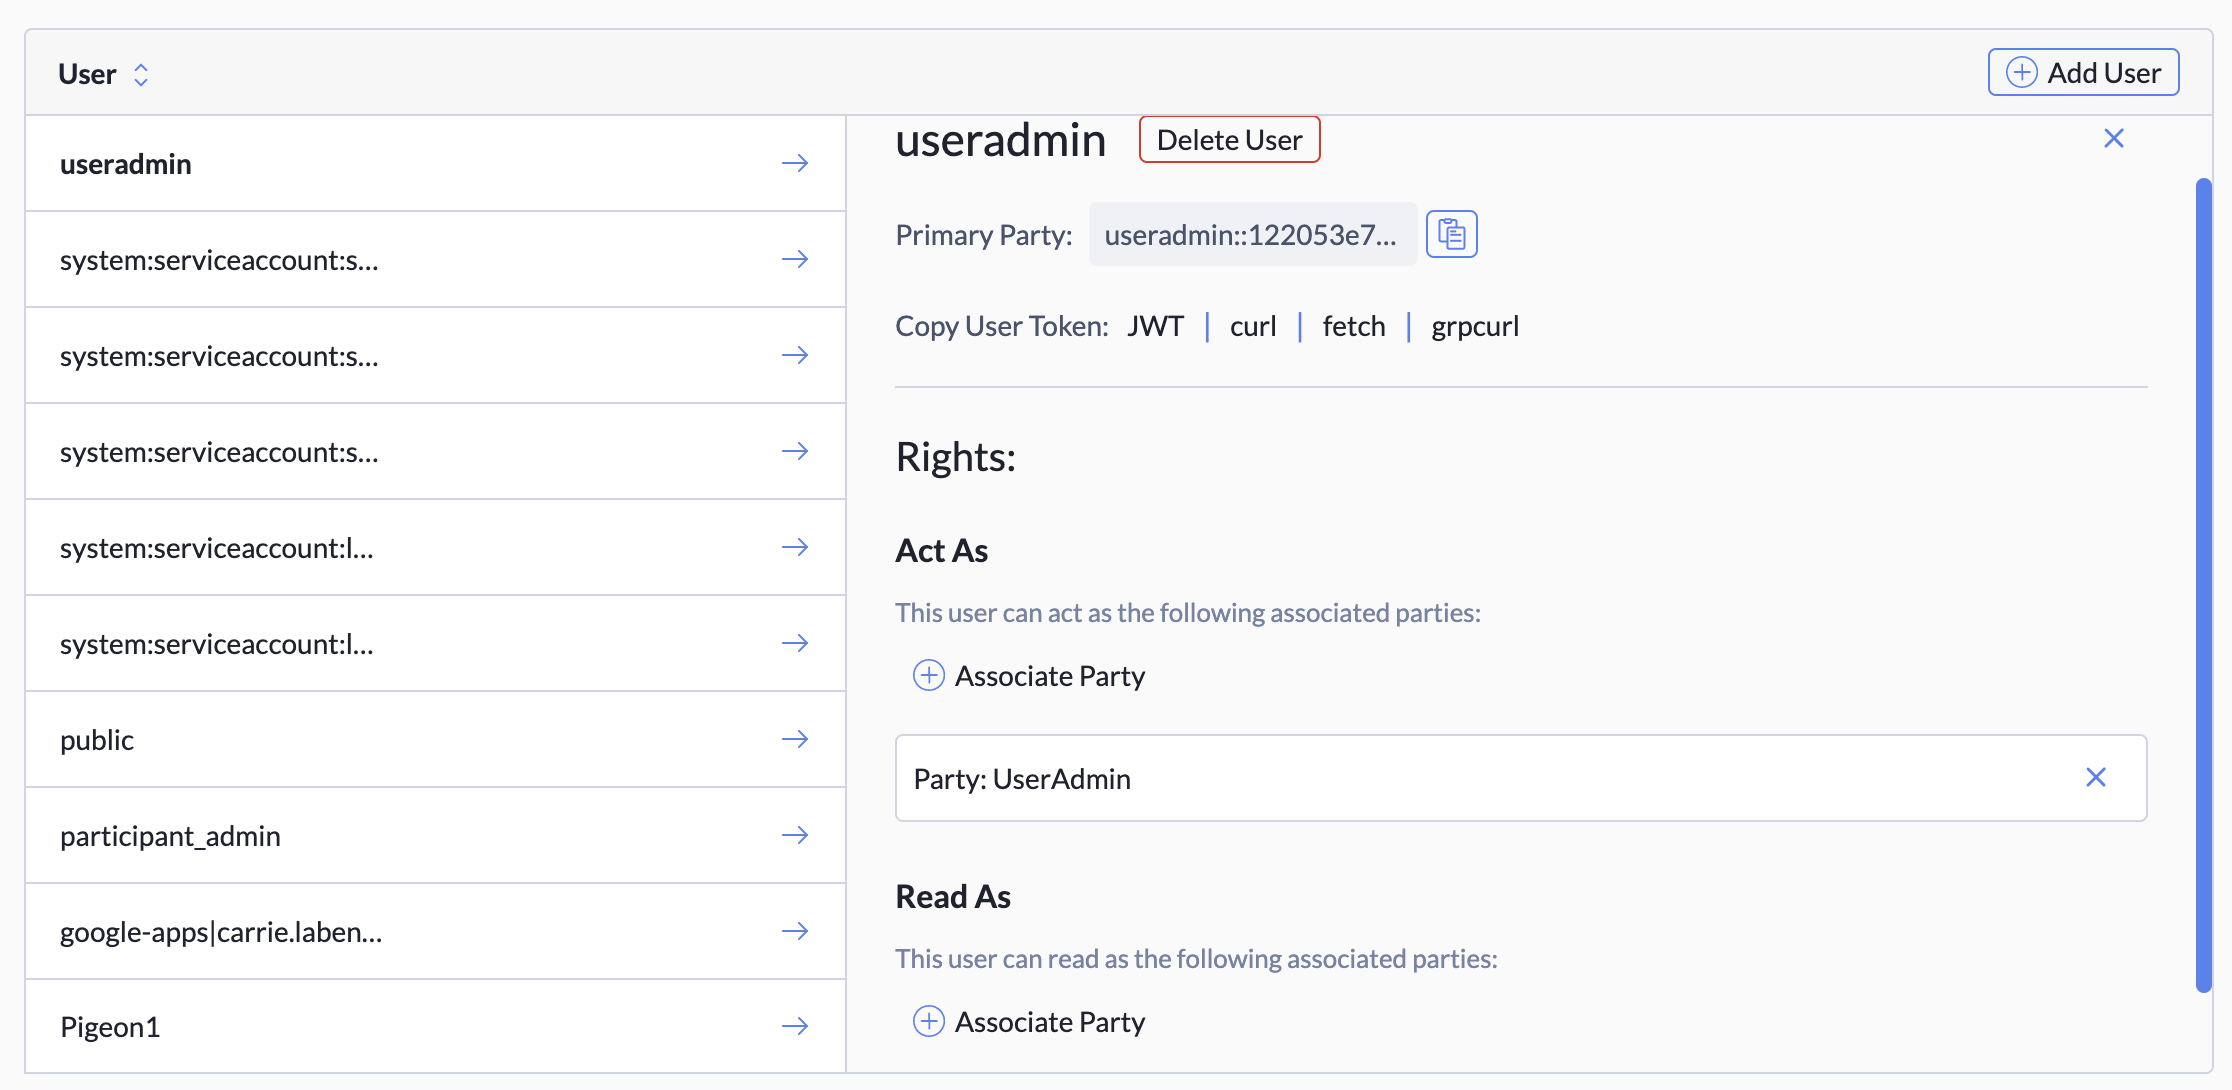 The Users zone of the Identities Tab, with expanded user details.